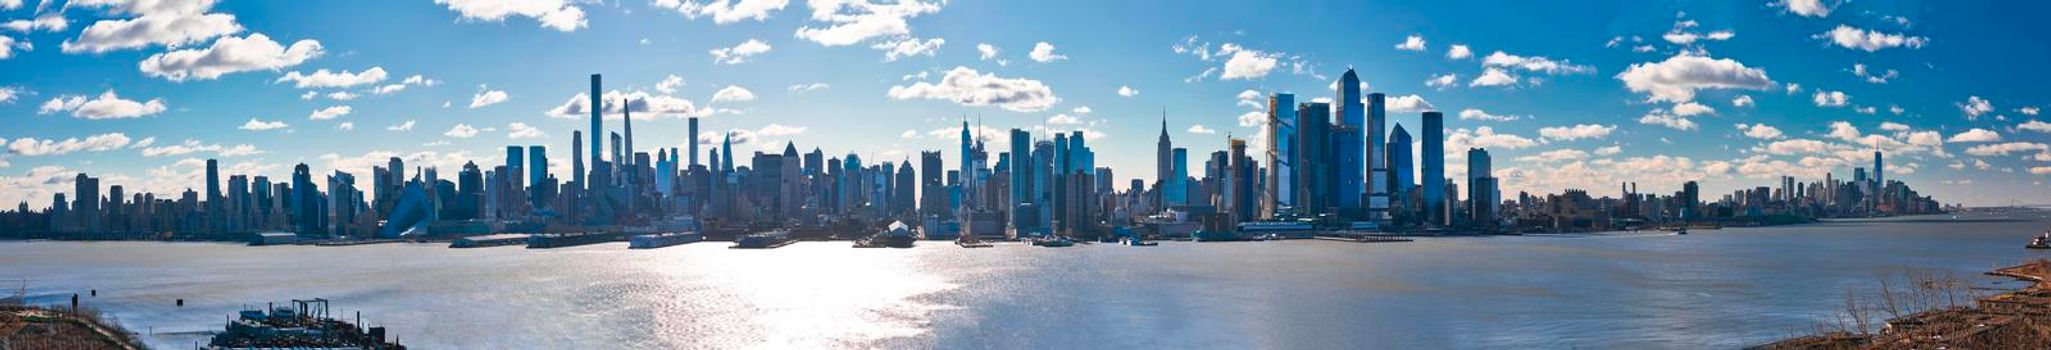 Megapanorama of New York City skyline and Hudson river view, United States of America